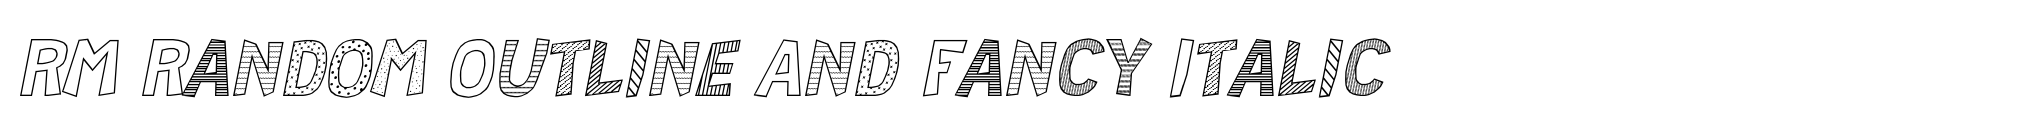 RM Random Outline And Fancy Italic image